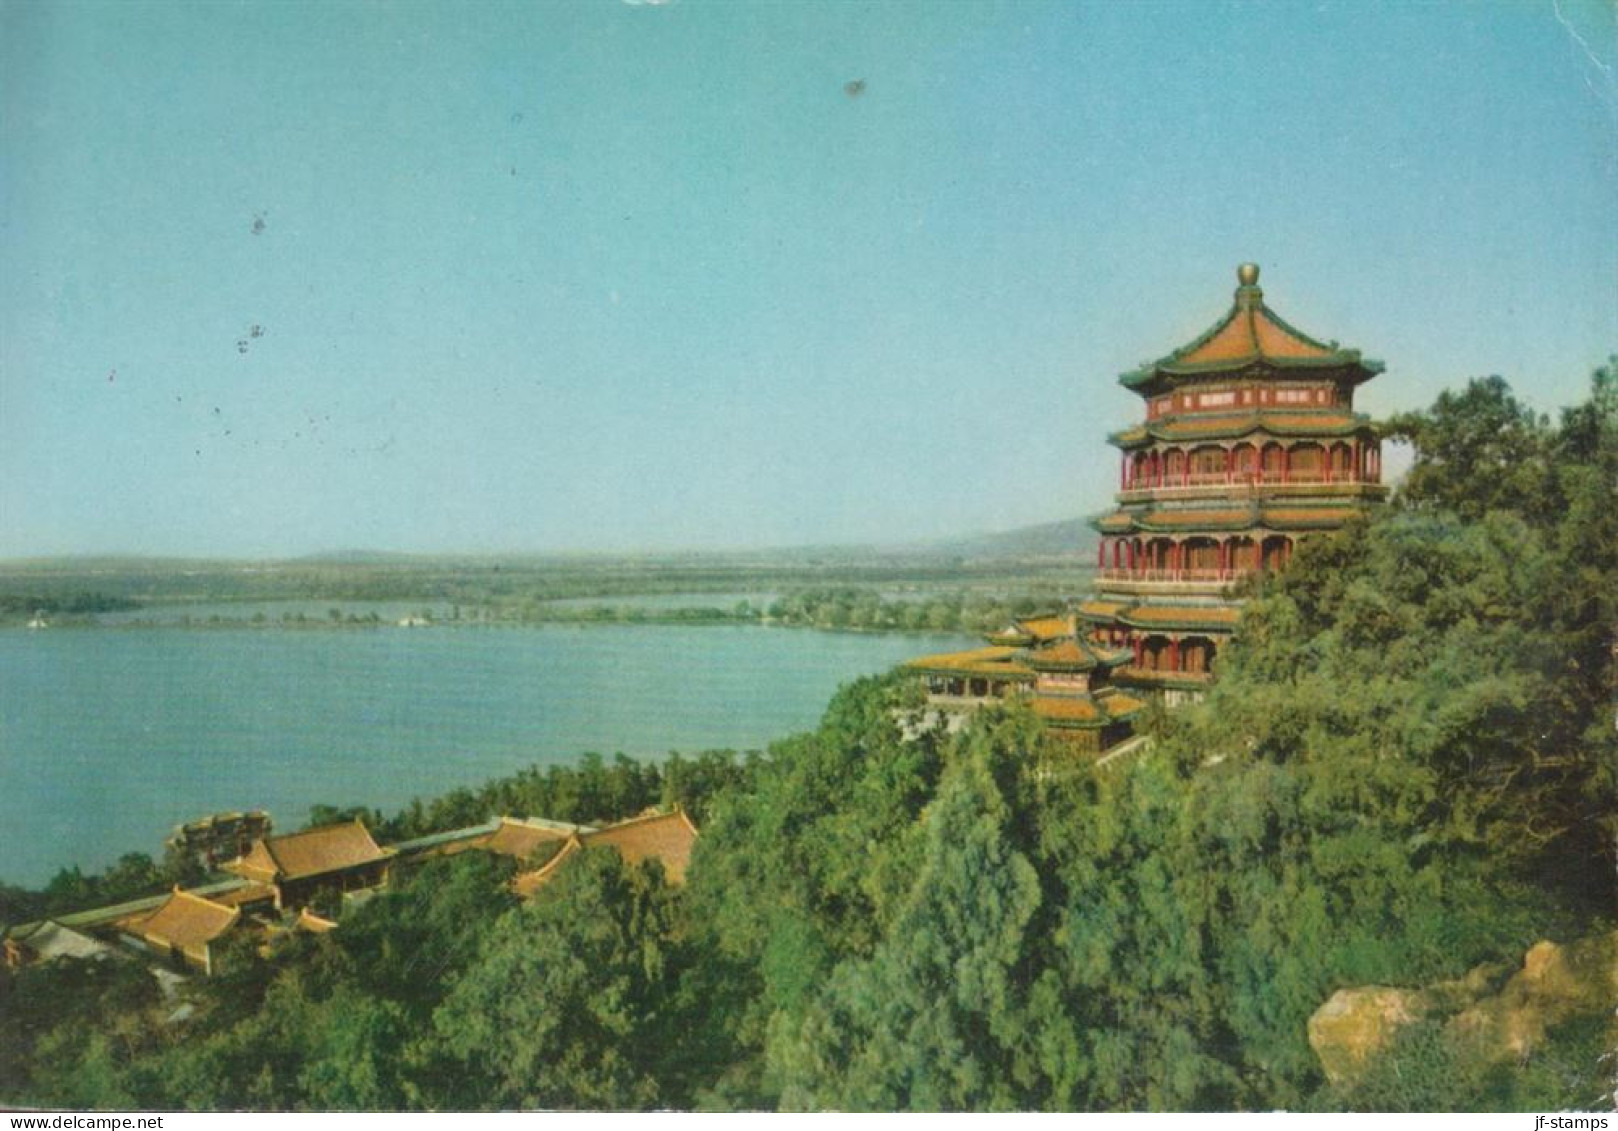 1972. CHINA. Fine Post Card (Longvity Hill, Summer Palace) To Sweden PAR AVION With 35 F + 8 F Revolutiona... - JF442622 - Lettres & Documents